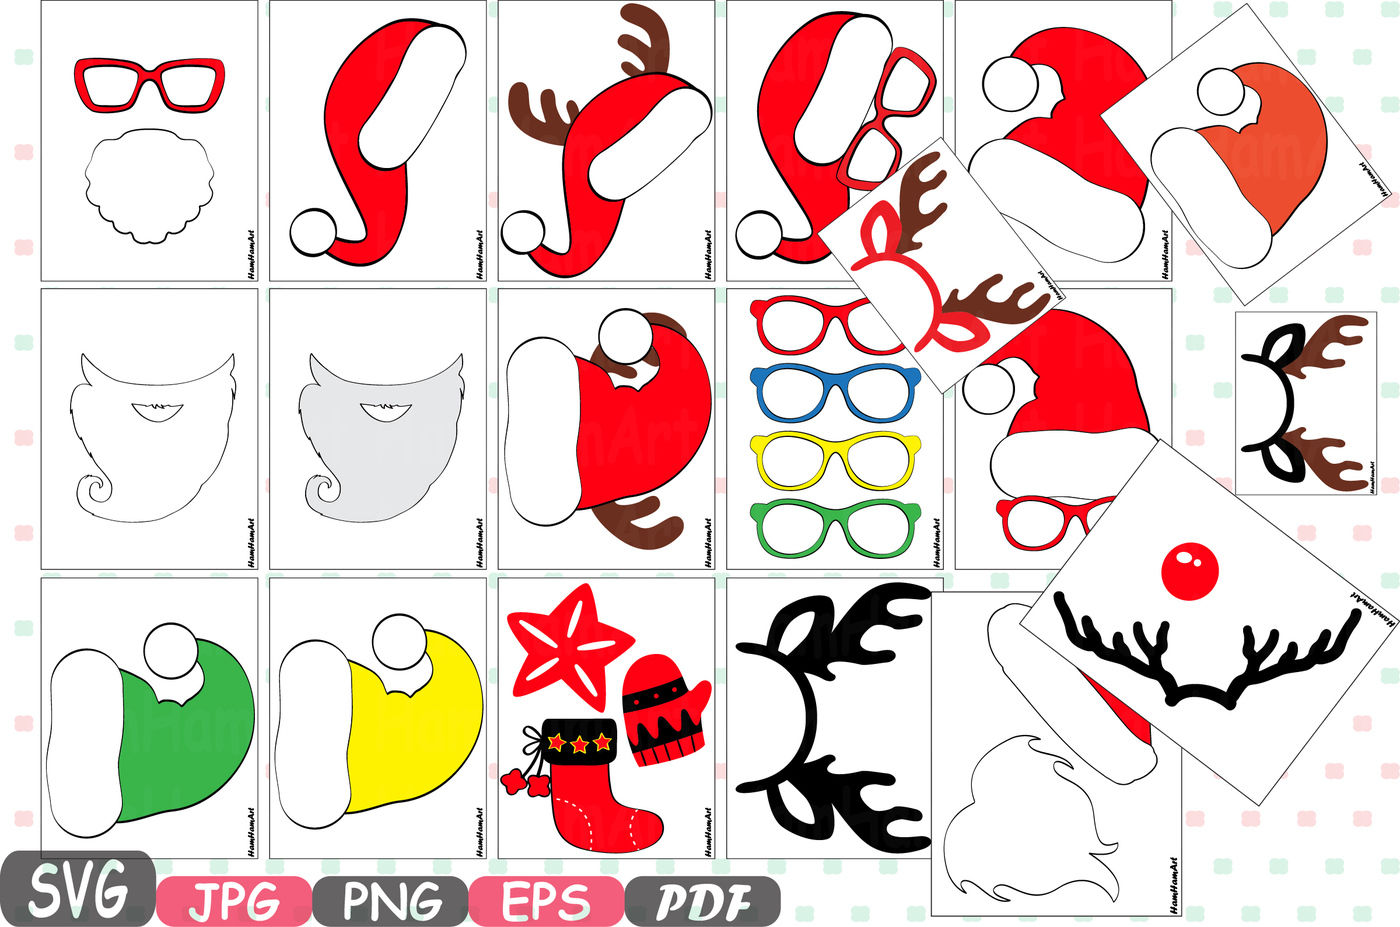 Christmas Props Party Photo Booth Silhouette Costume Cutting Files Svg Horns Clipart Bunting Digital Santa Claus Props Reindeer Vinyl 10p By Hamhamart Thehungryjpeg Com